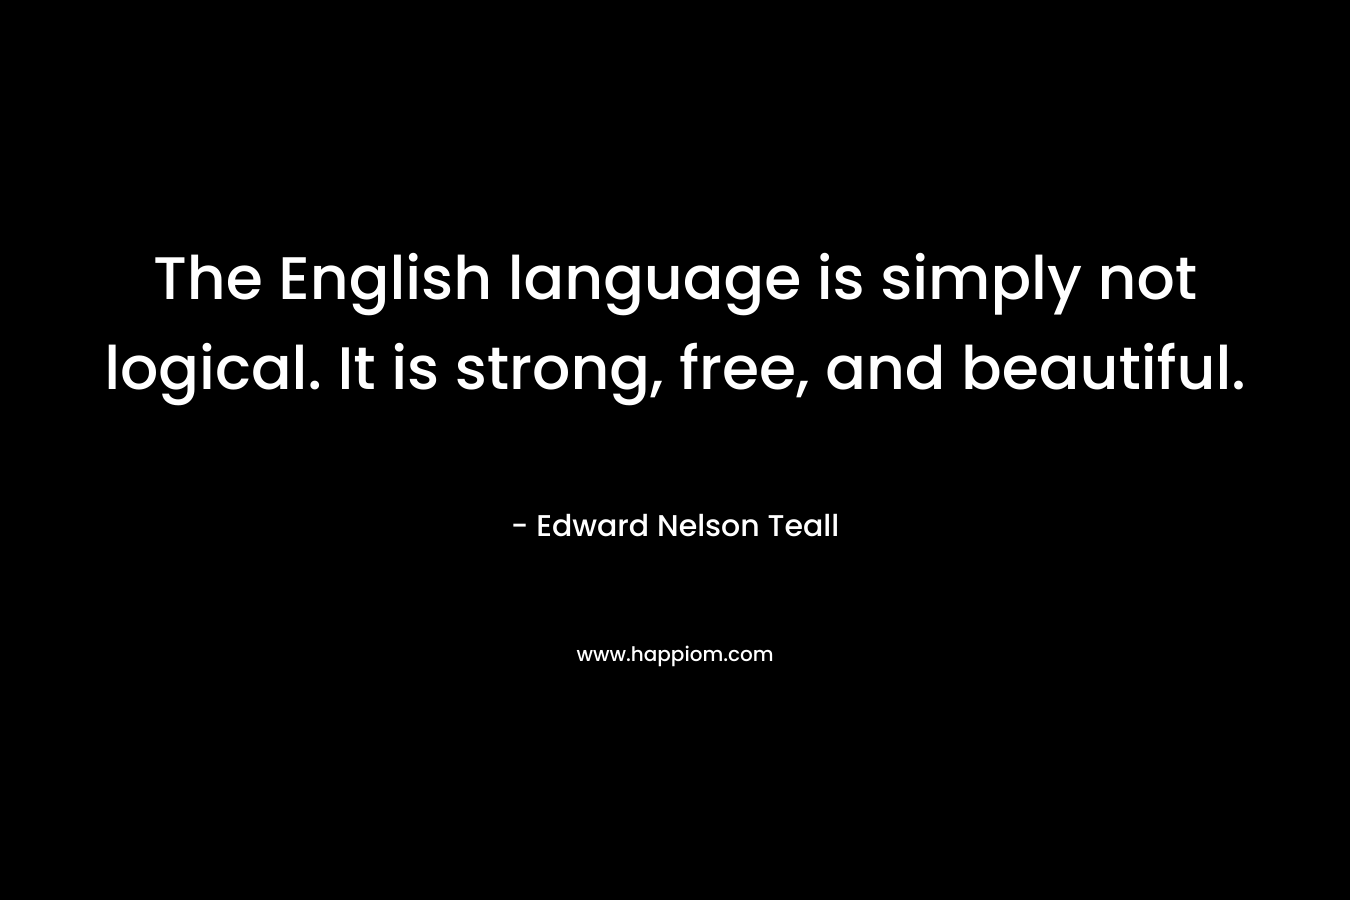 The English language is simply not logical. It is strong, free, and beautiful.